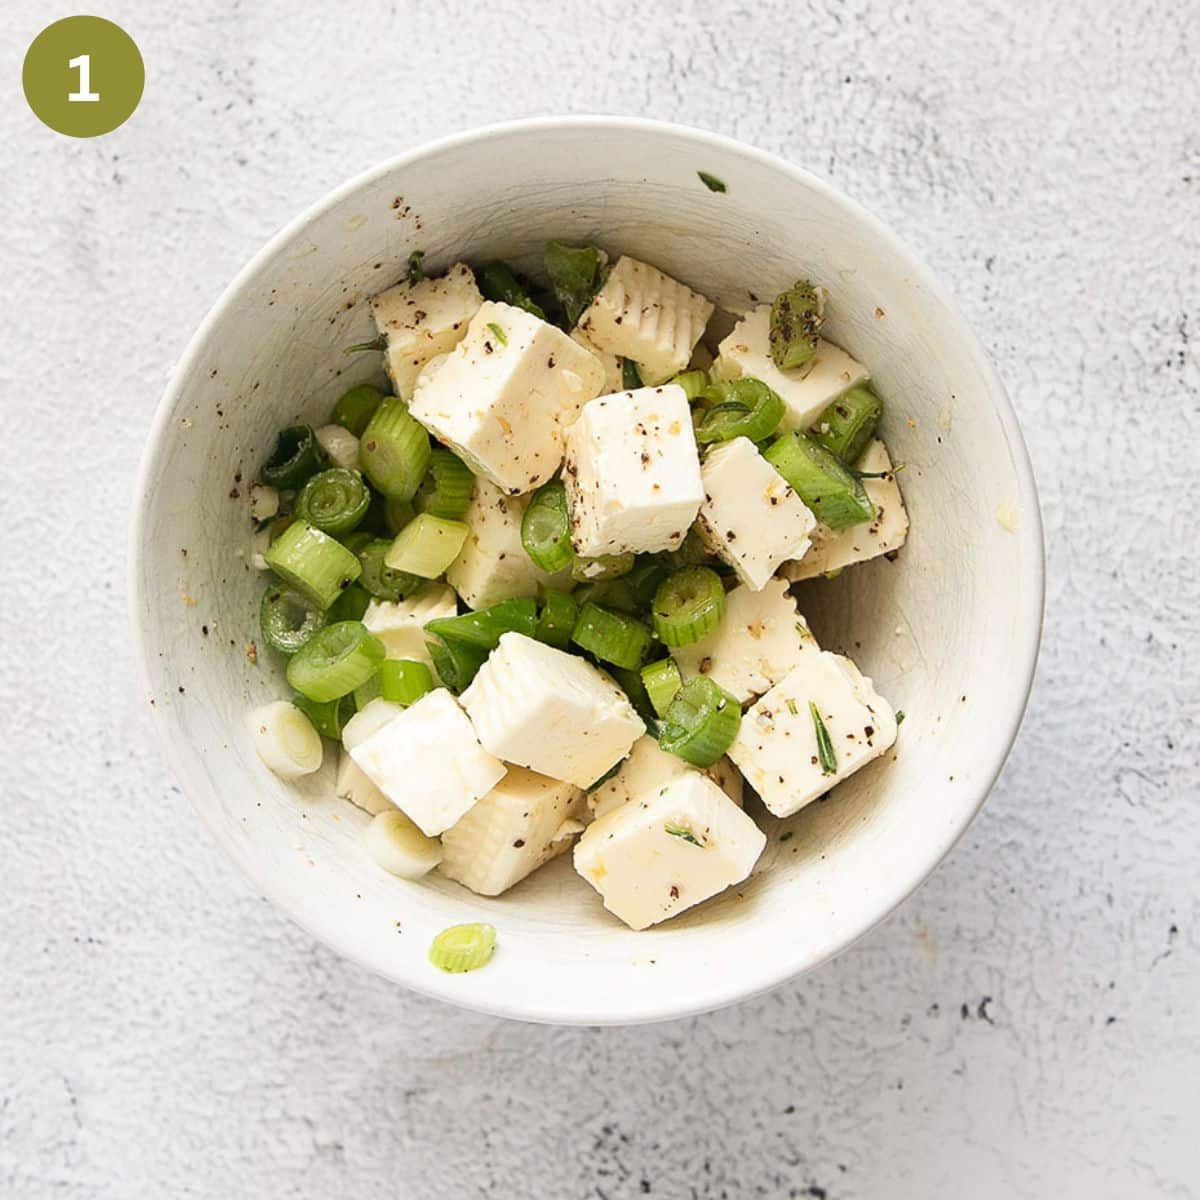 feta cubes and green onion rings marinating in a small white bowl.